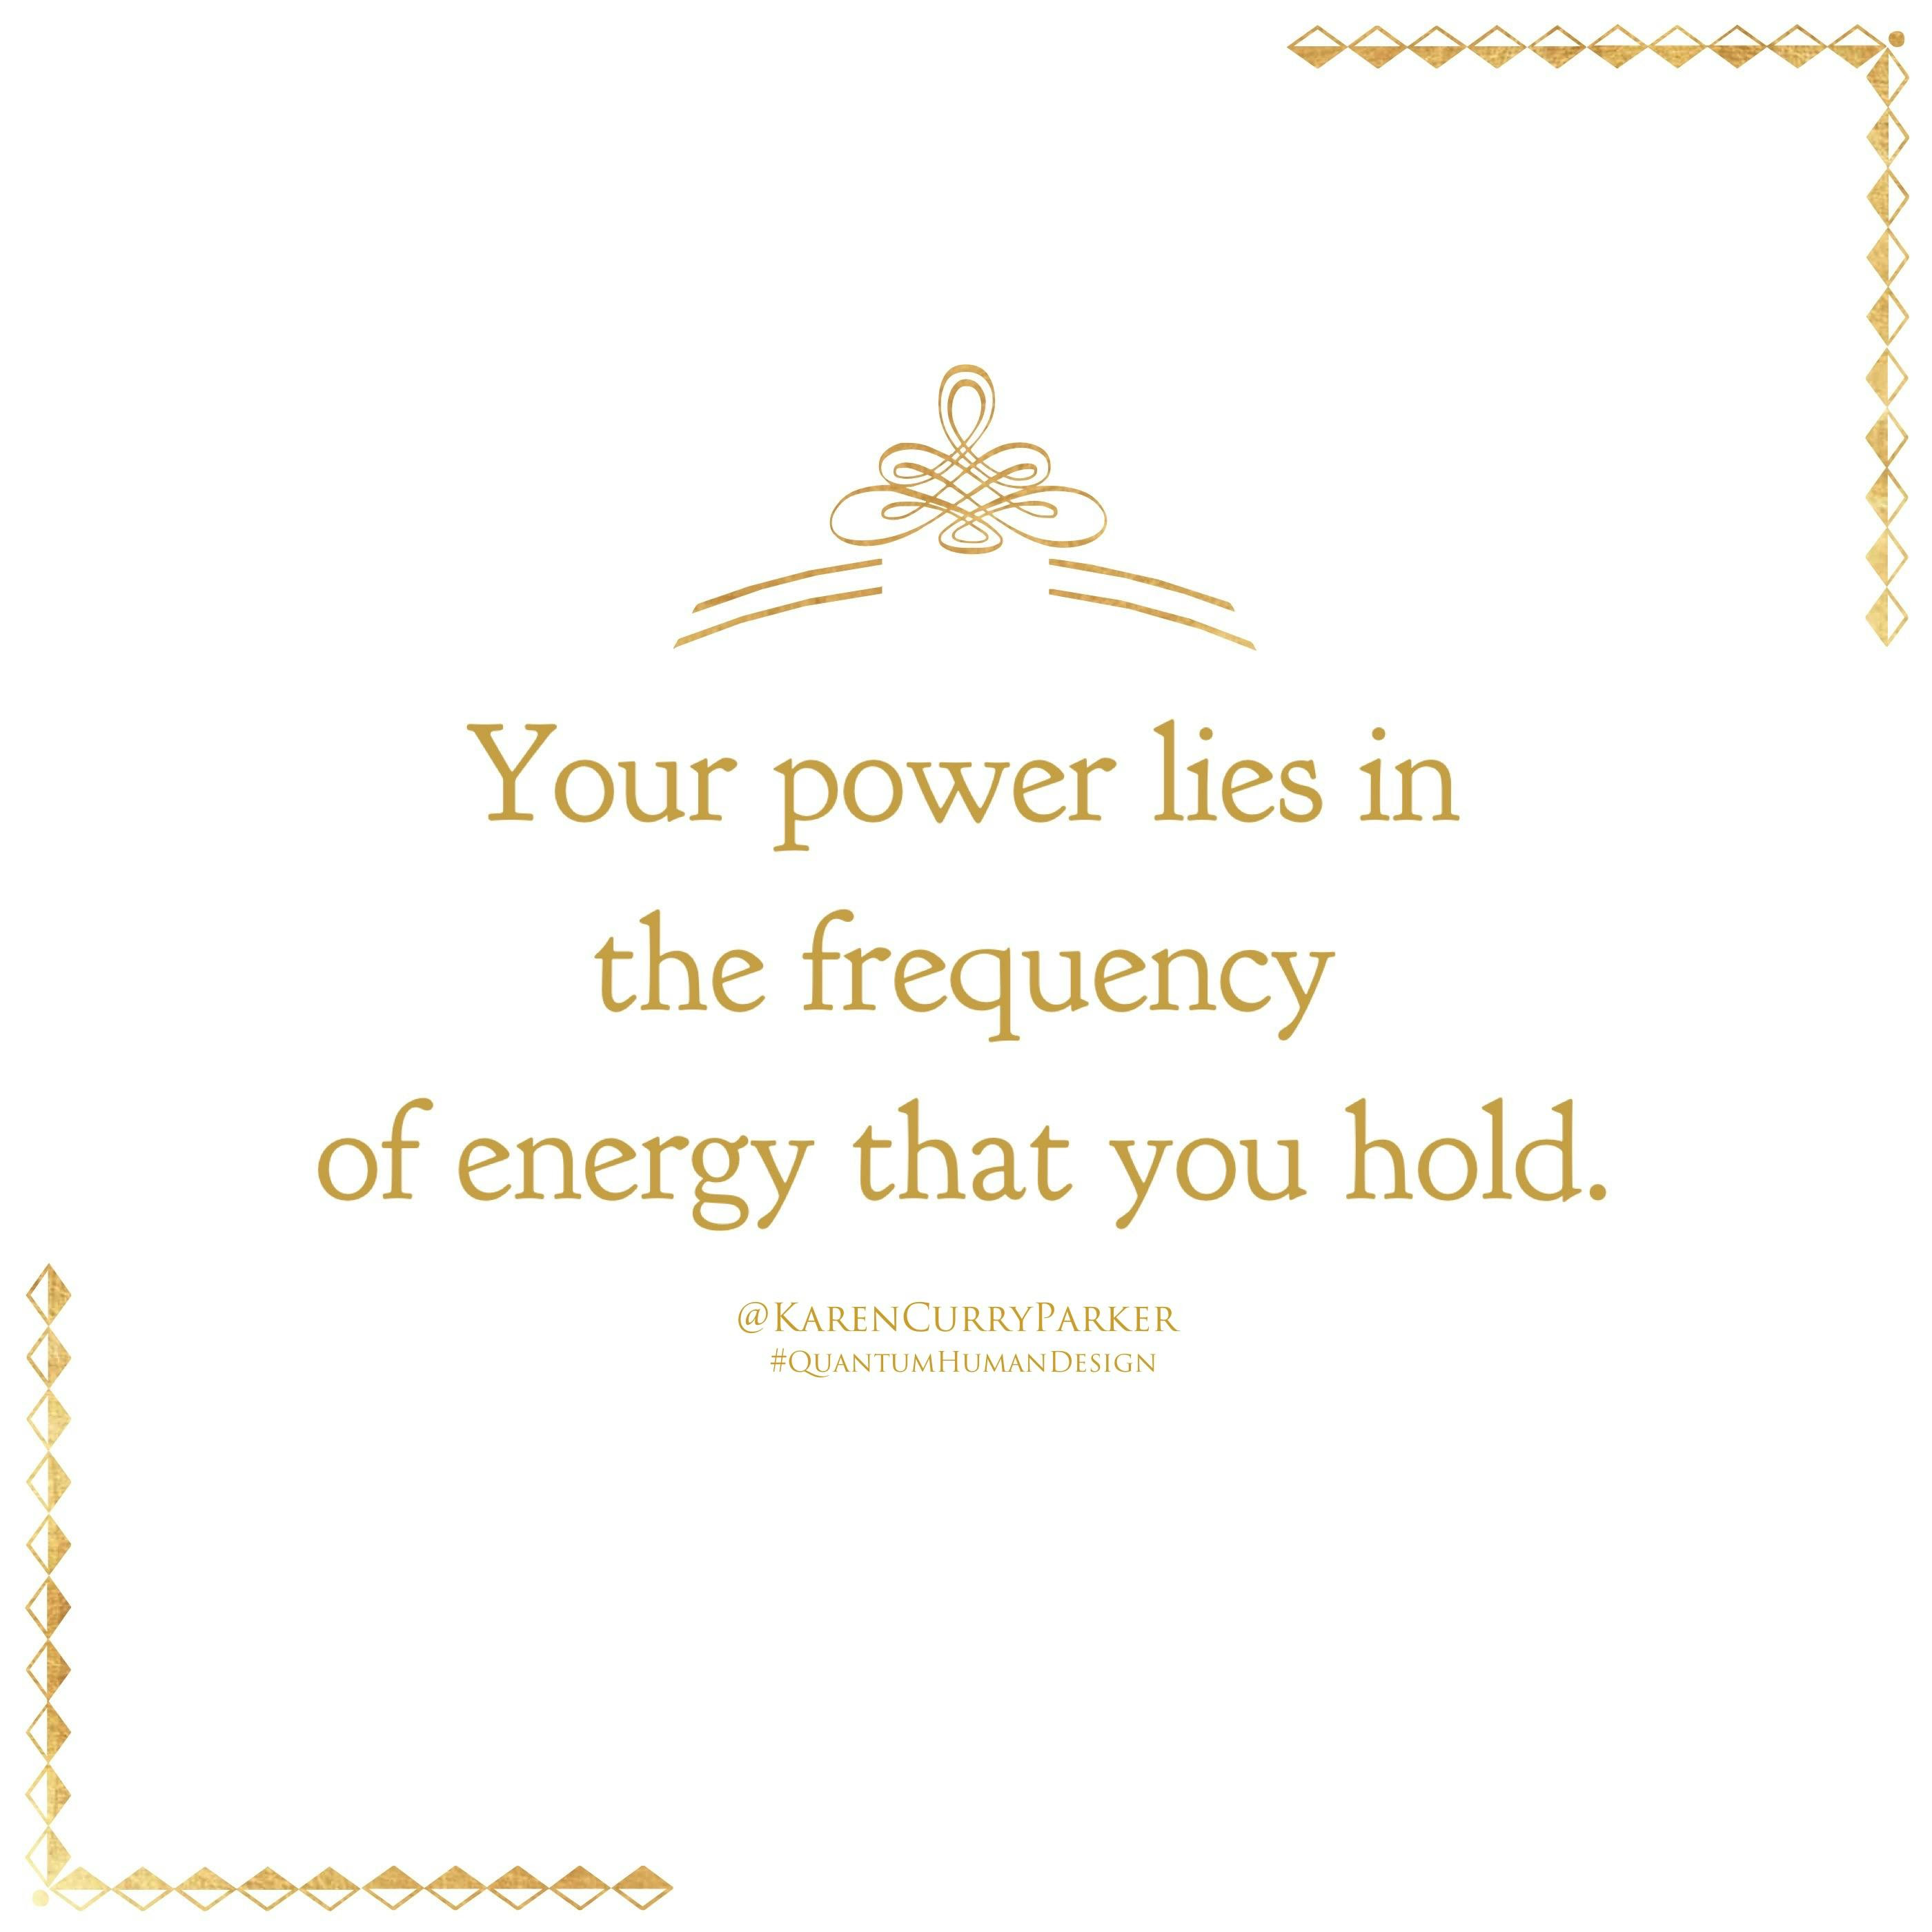 an image about energy and story Your power lies in the frequency of energy you hold